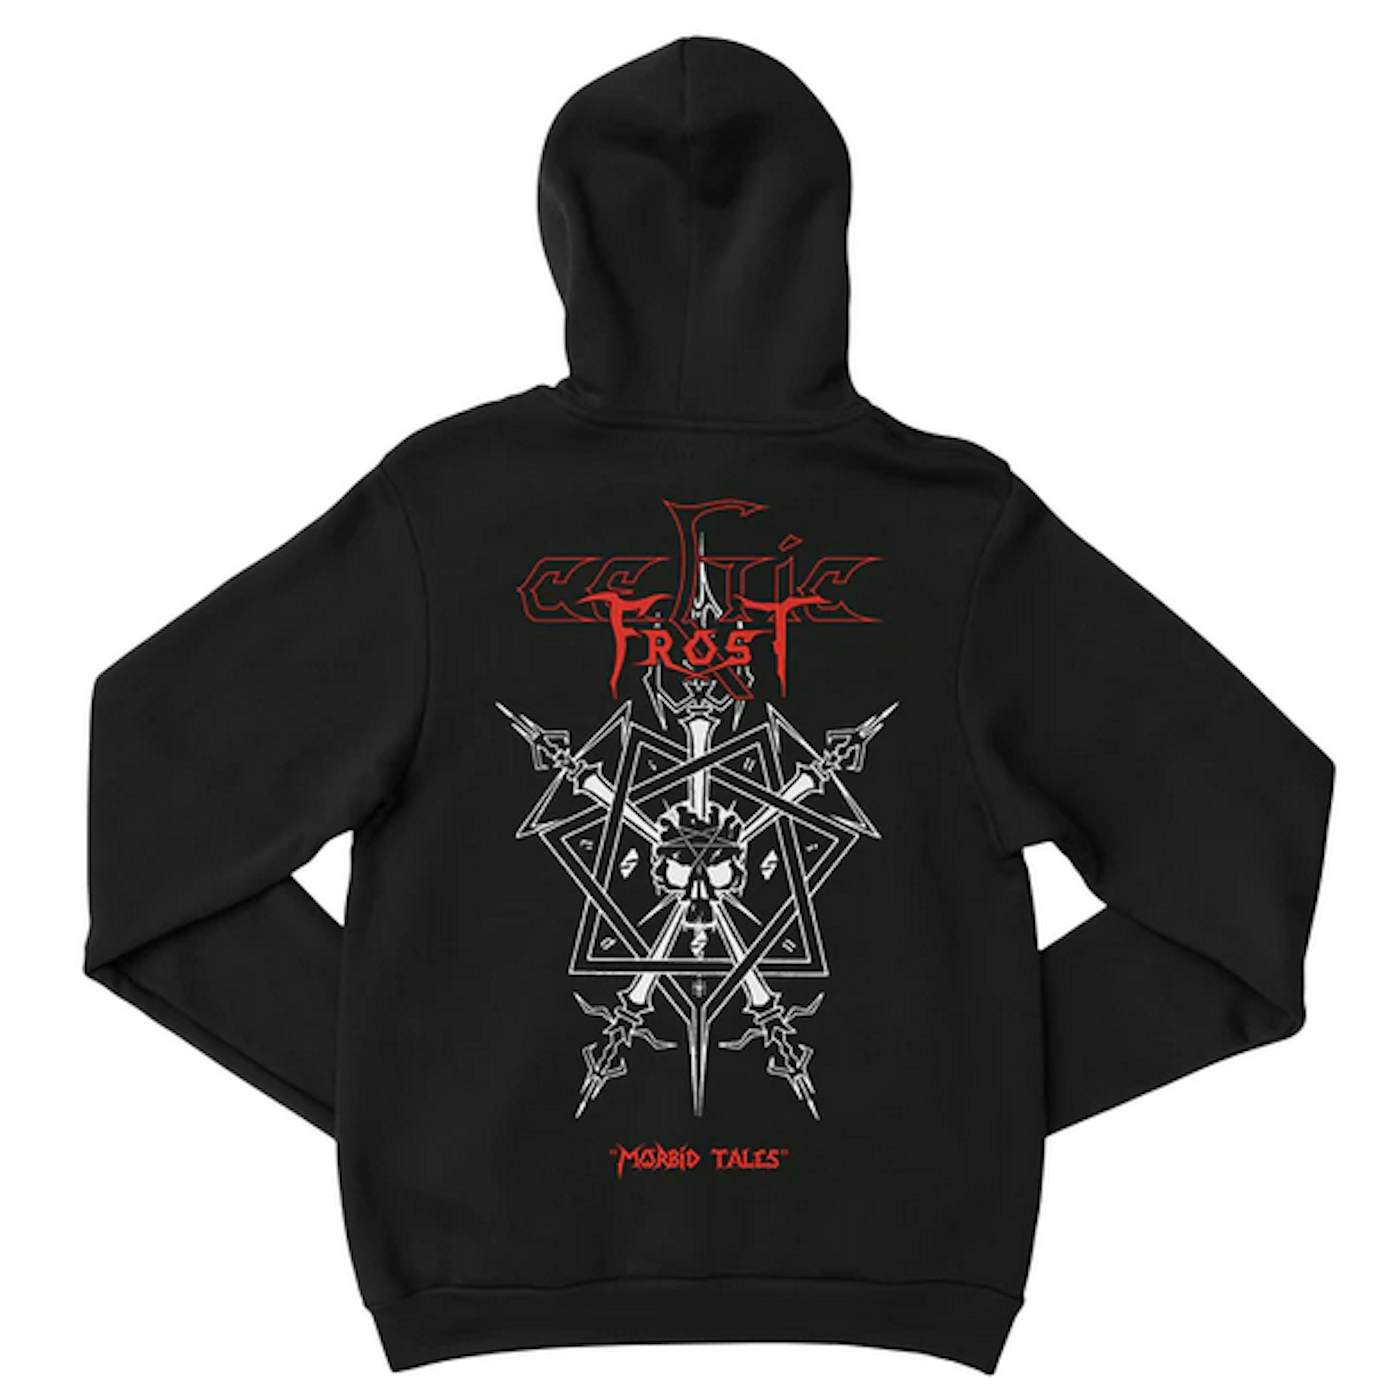 Celtic Frost "Morbid Tales" Pullover Hoodie